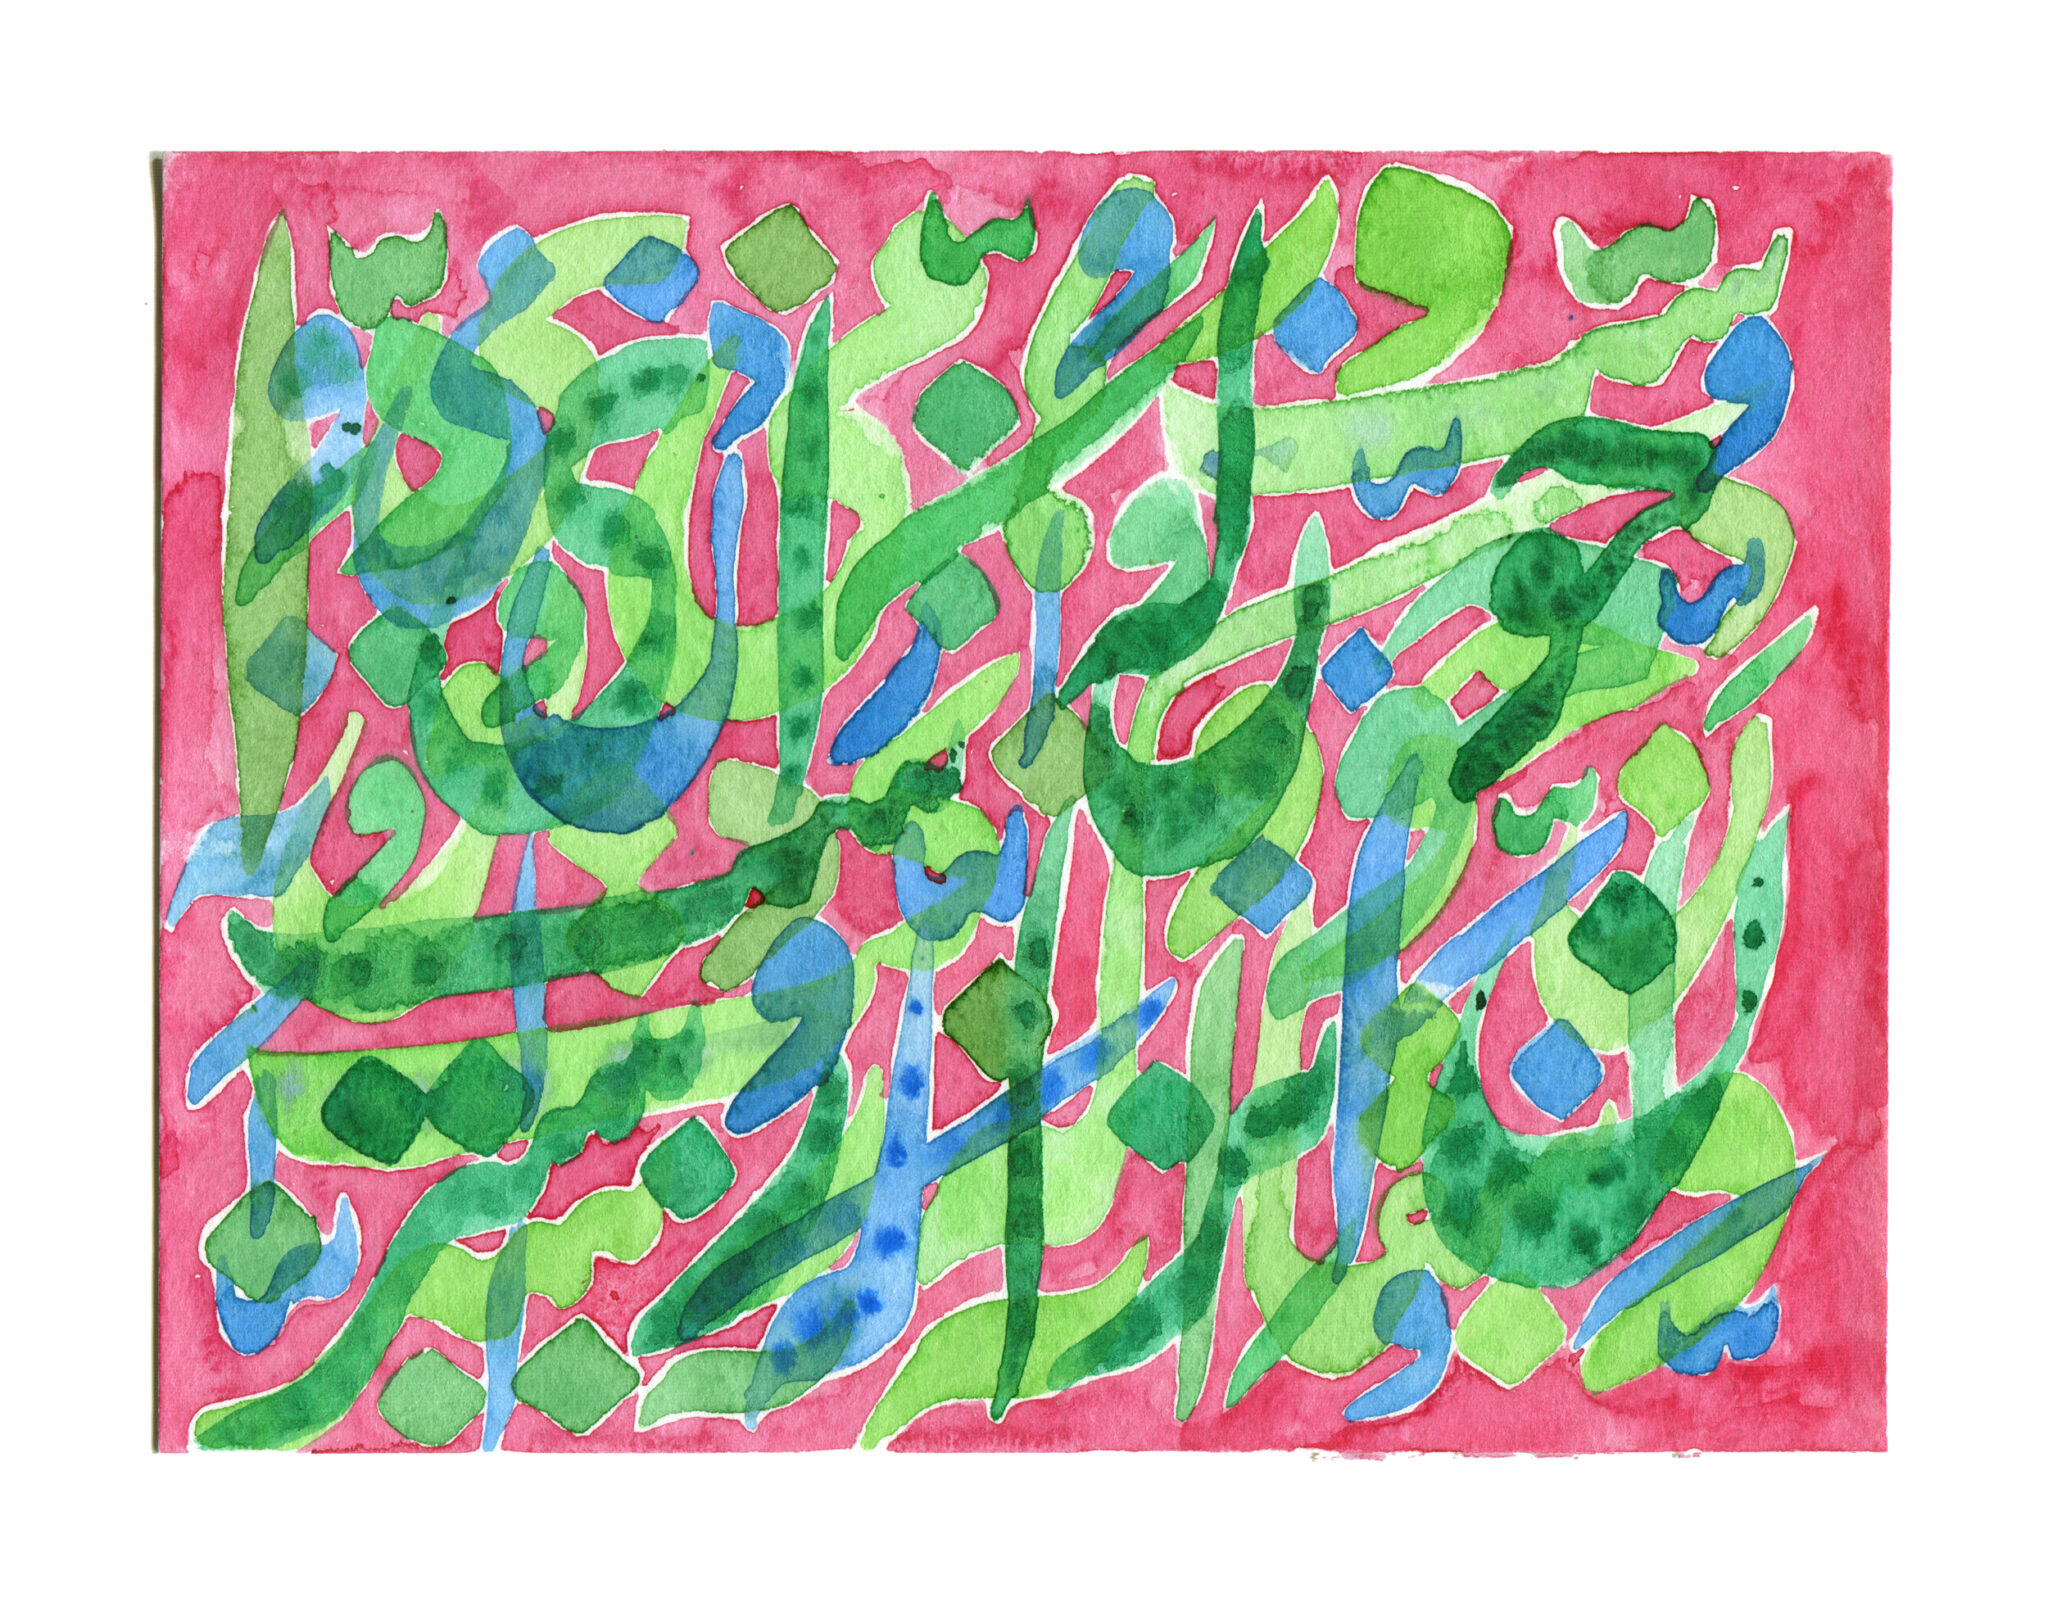 Untitled (Study of Persian Calligraphy)